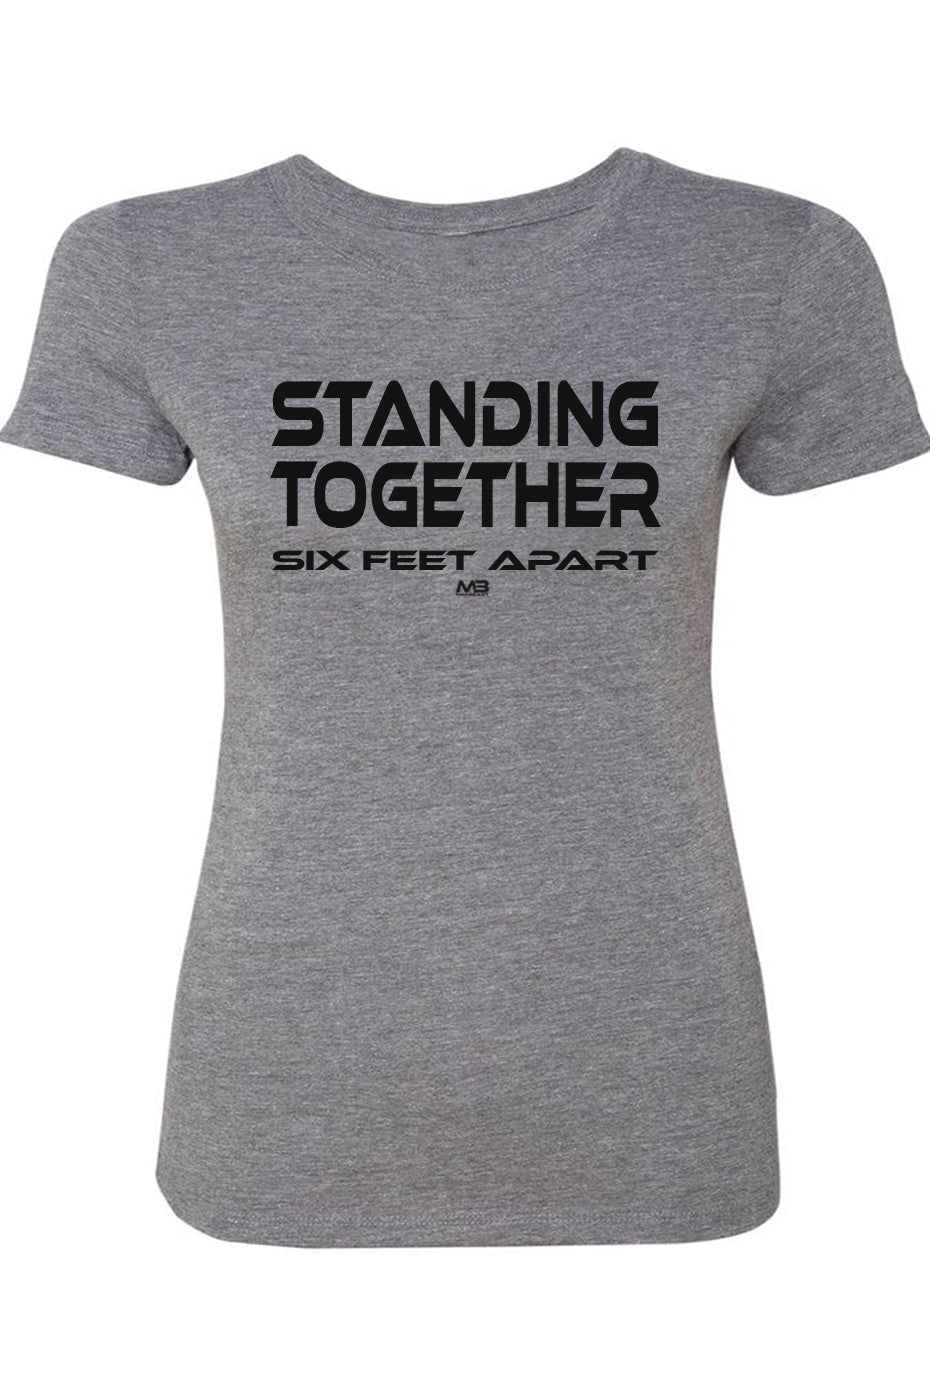 Women's "Standing Together" Fitted Tee